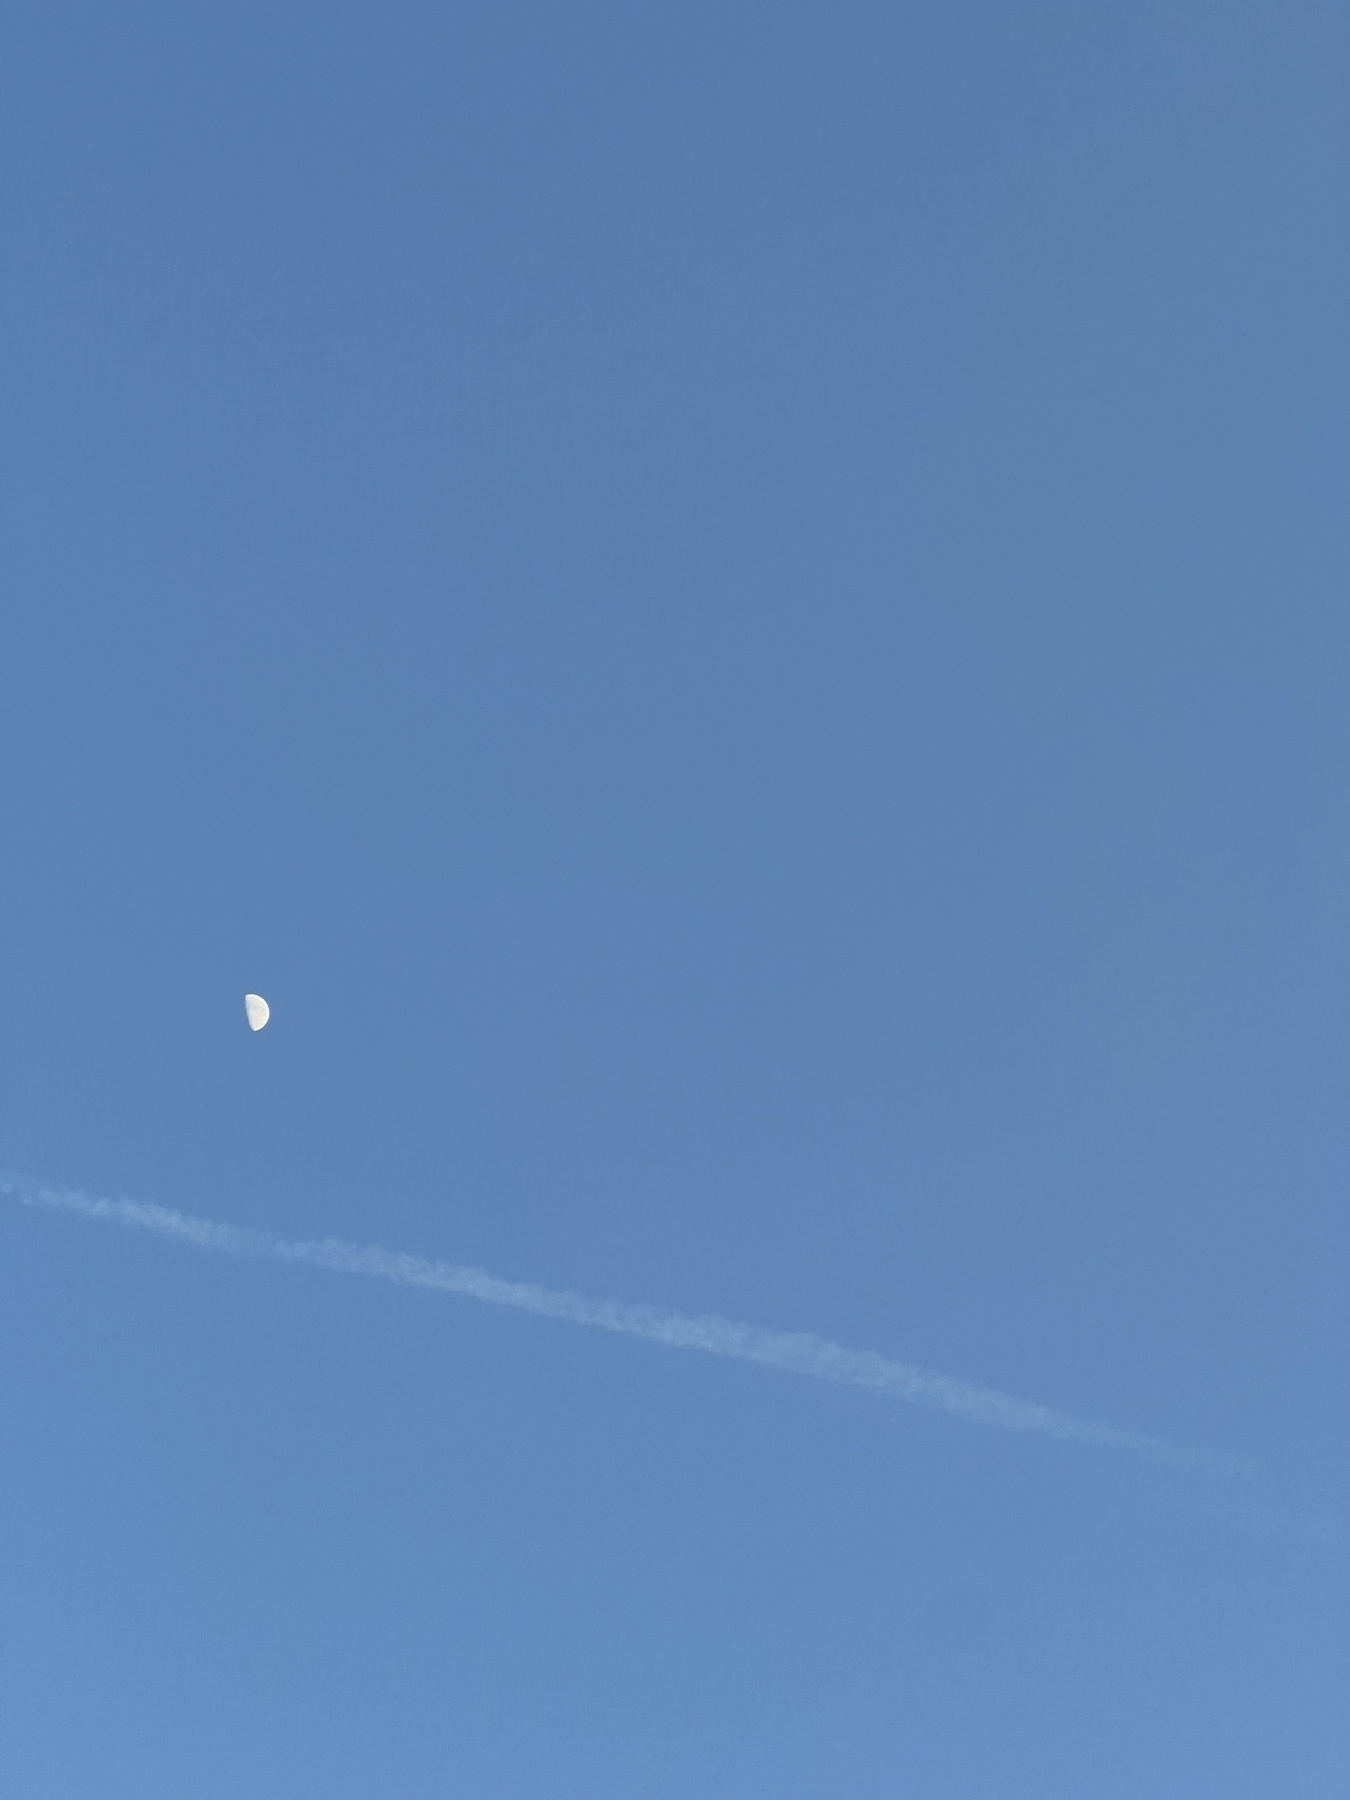 A view of the moon against a blue sky. 